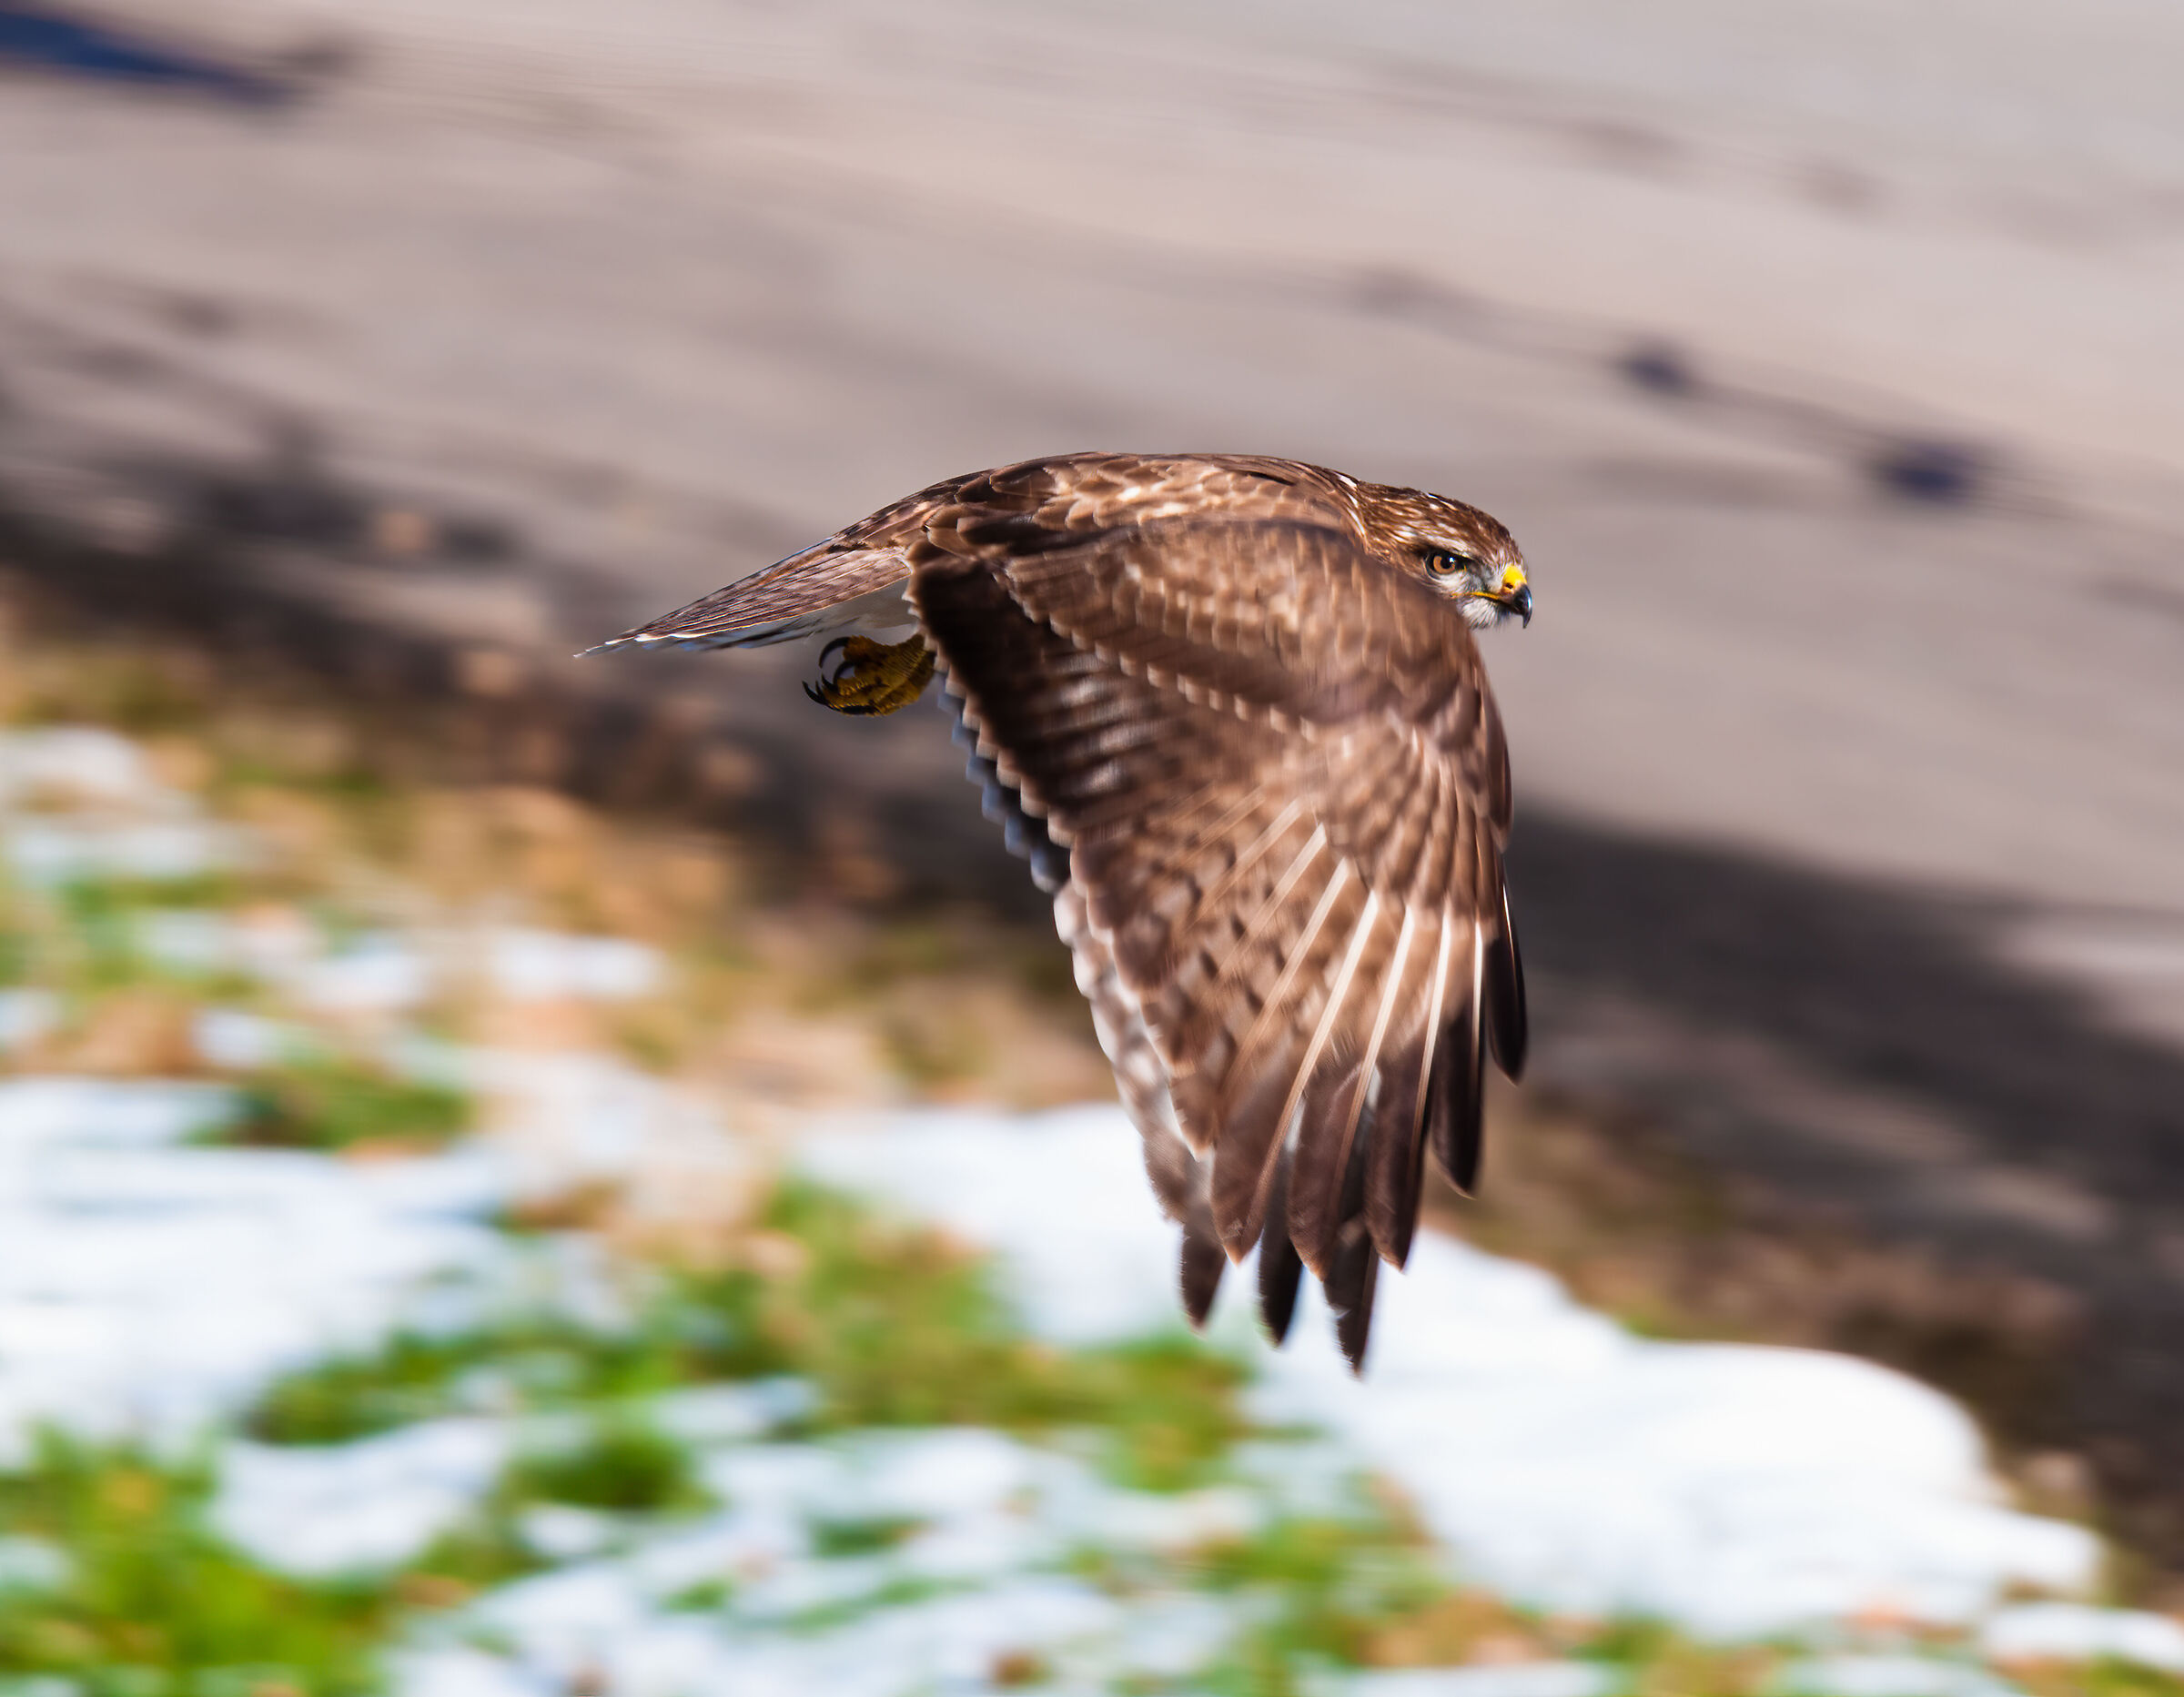 Buzzard... on the fly...